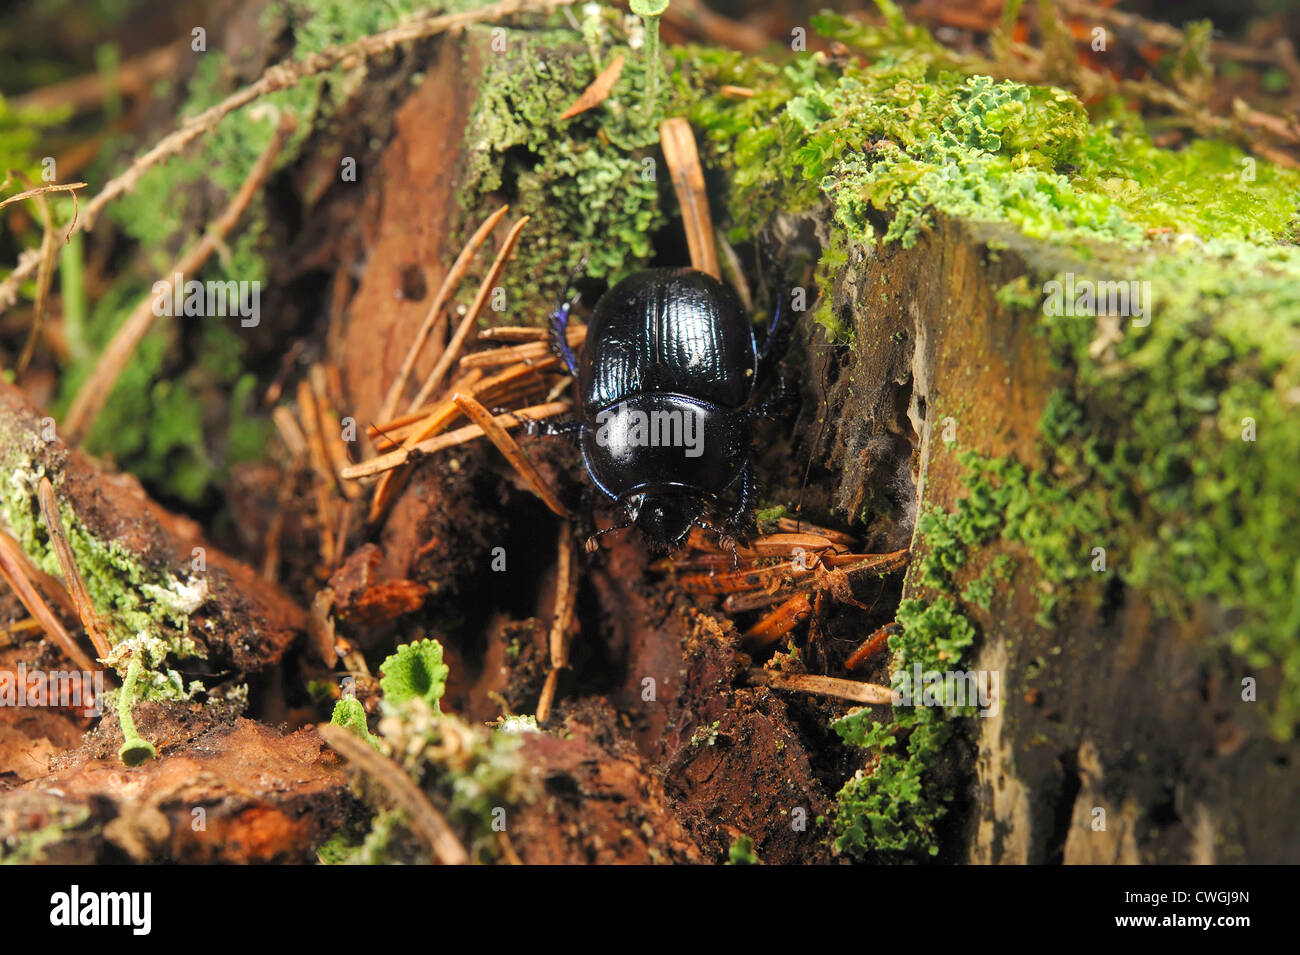 Forest dung beetle camminando in una foresta Foto Stock